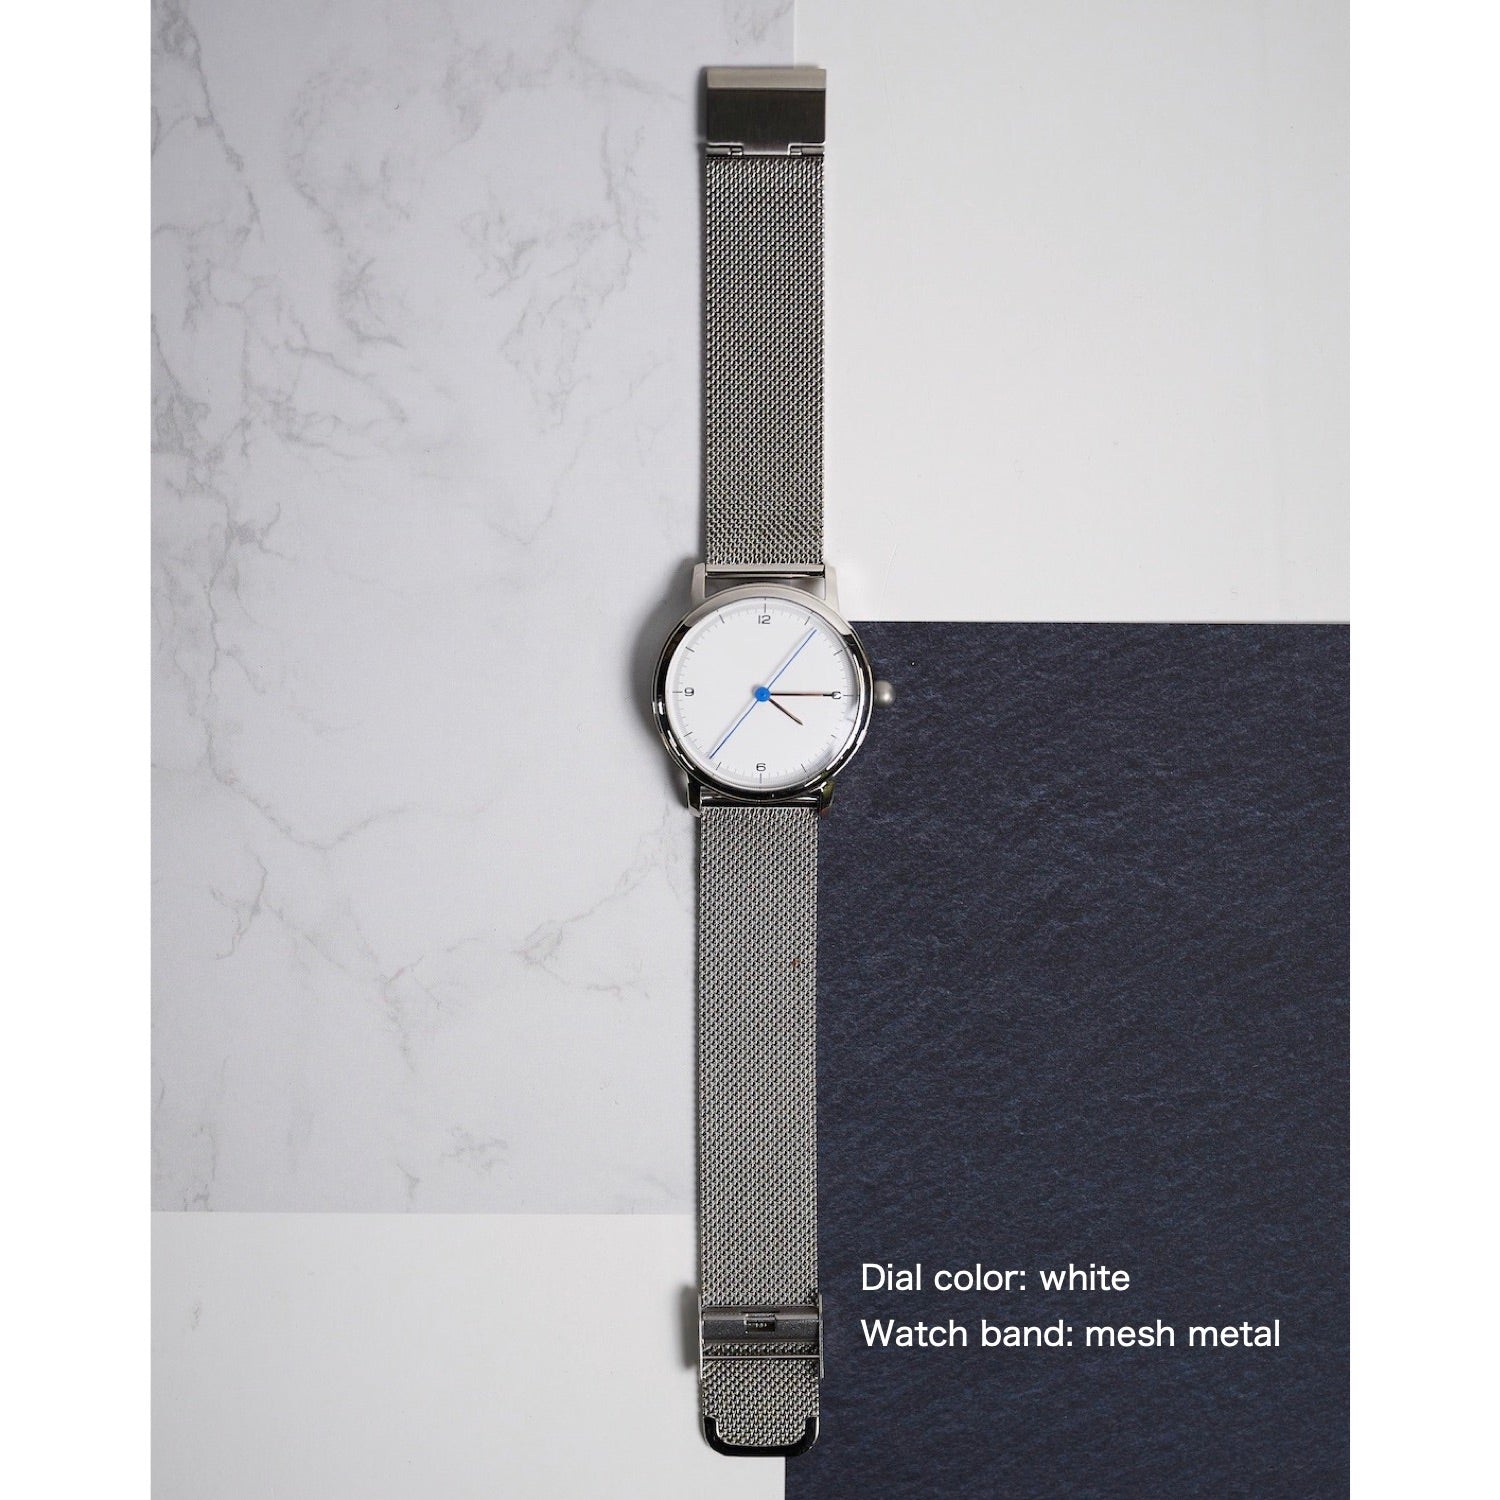 Dial color: white / watch band: mesh metal